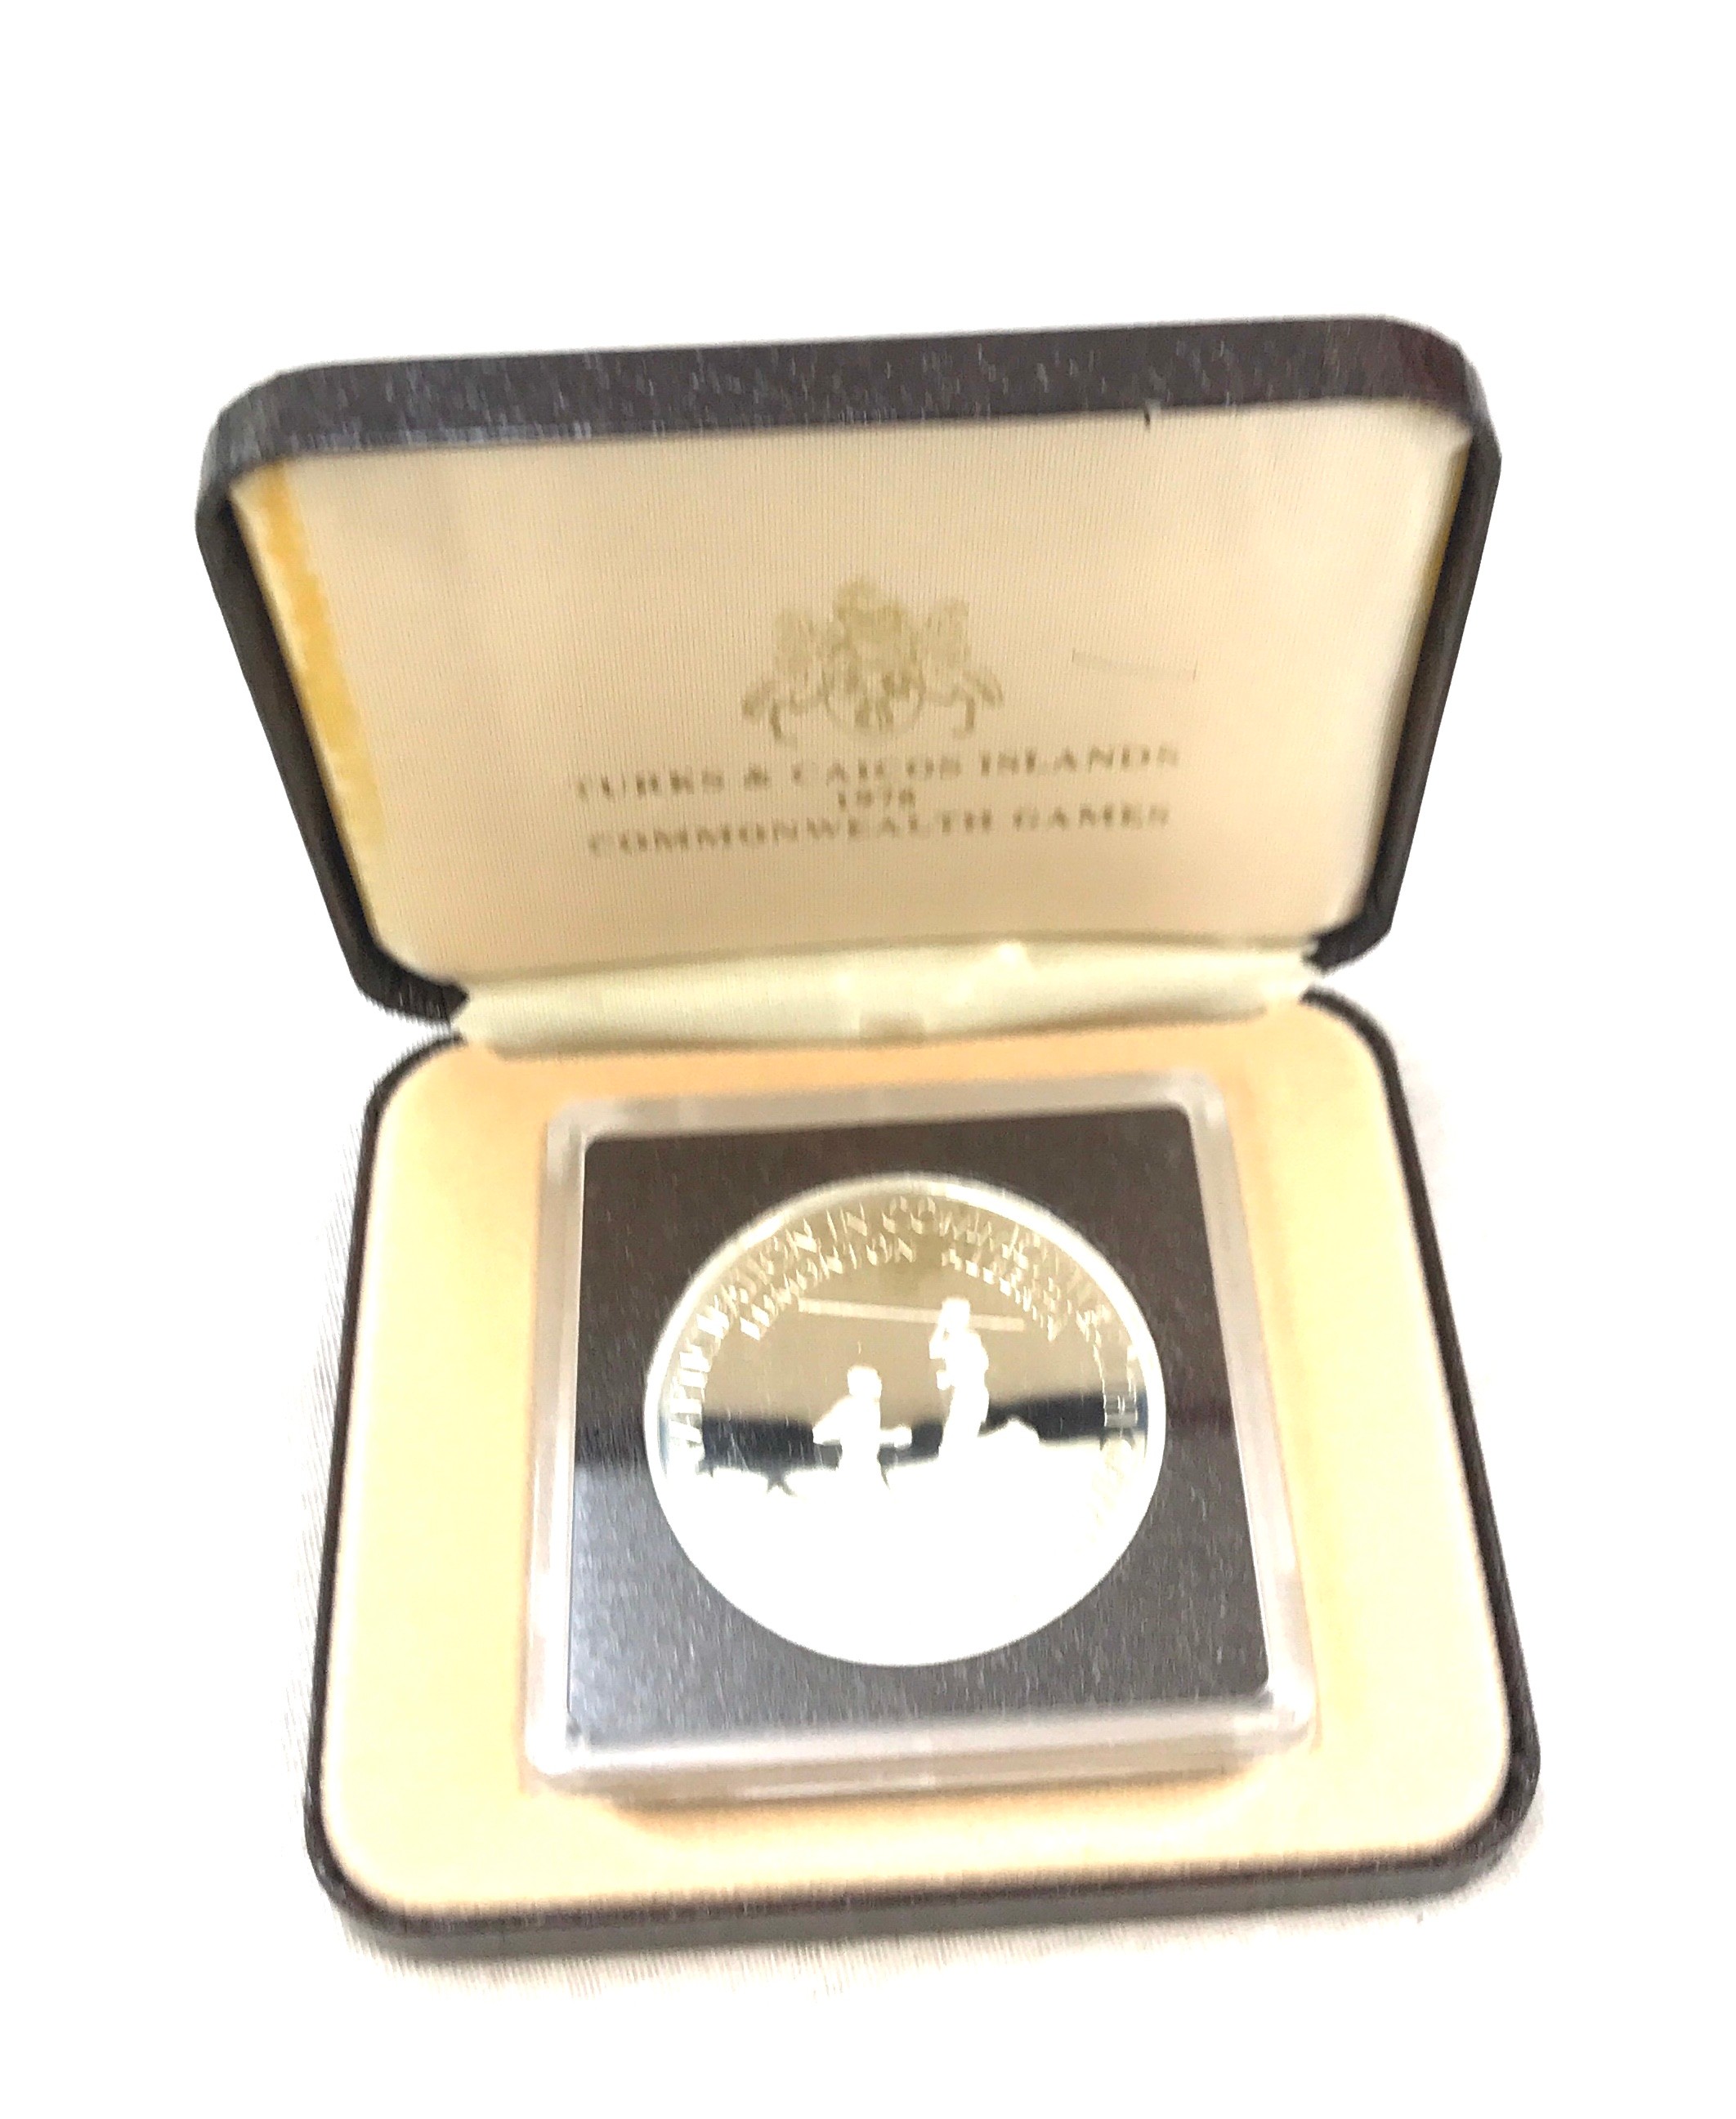 Cased 1978 Turks and Caicos Islands commonwealth games 20 crown silver proof coin with COA - Image 2 of 4